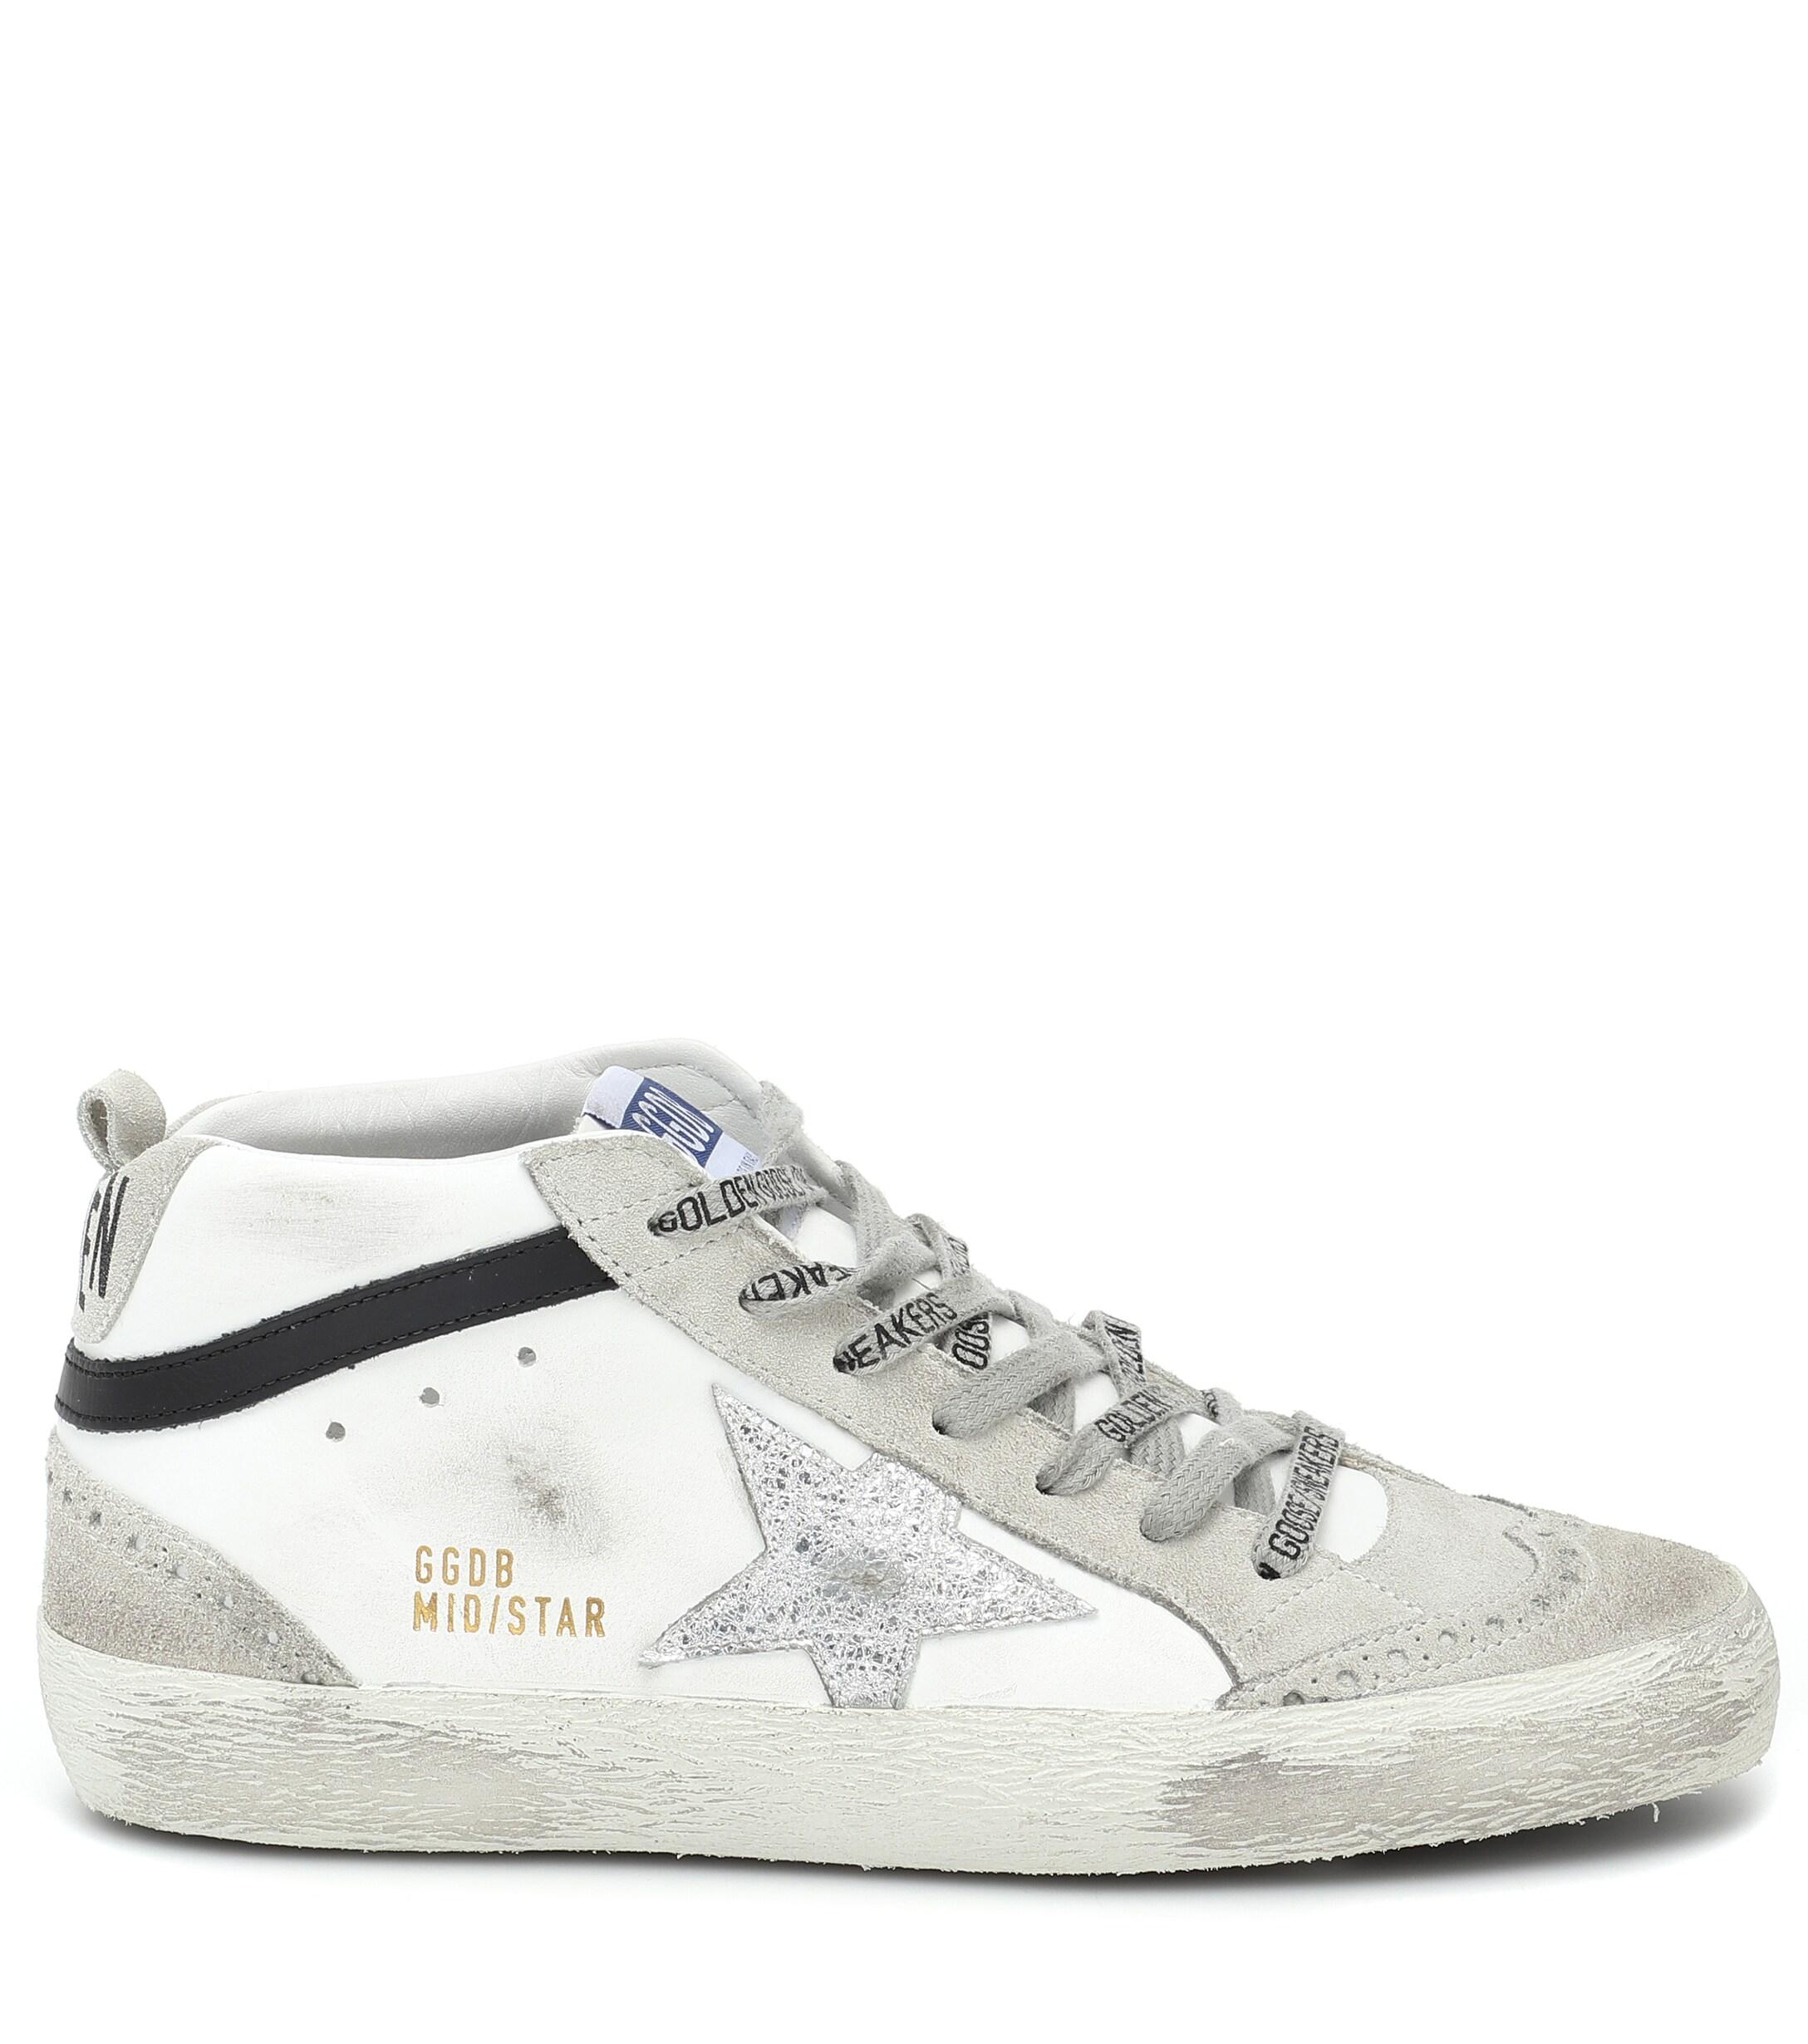 Golden Goose Deluxe Brand Goose Mid Star Leather Sneakers in White - Lyst